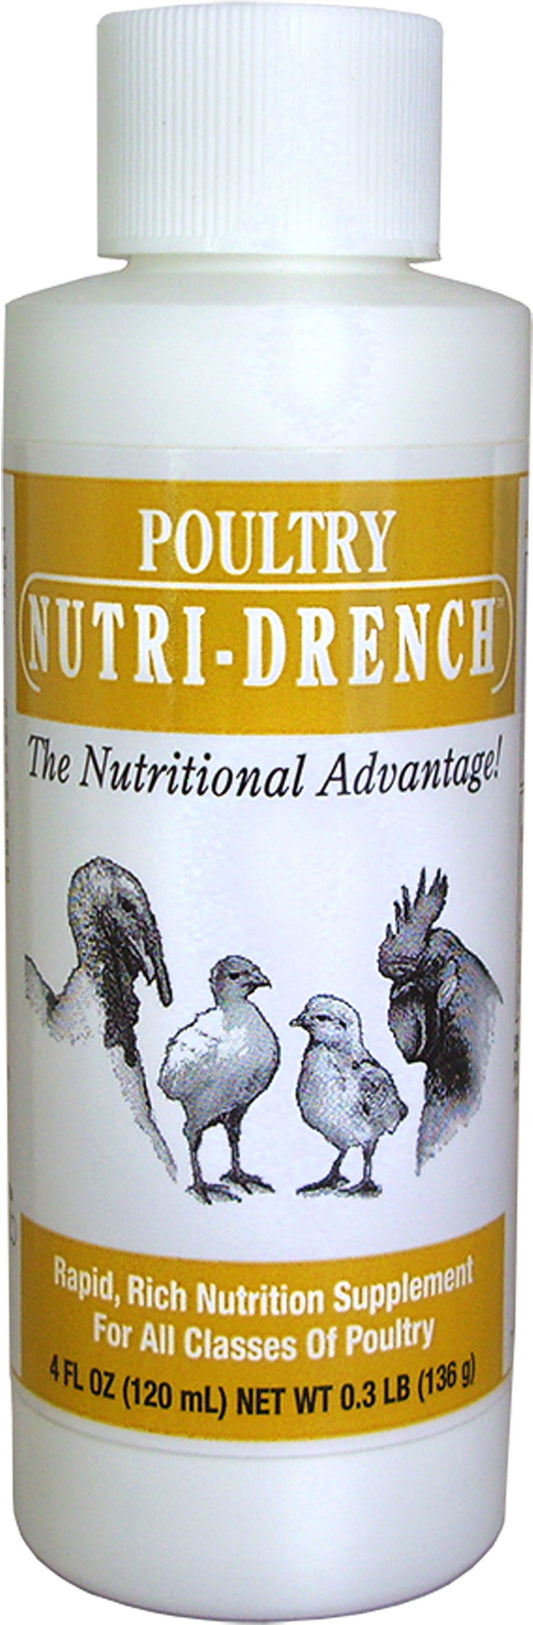 Nutri Drench Pourtry